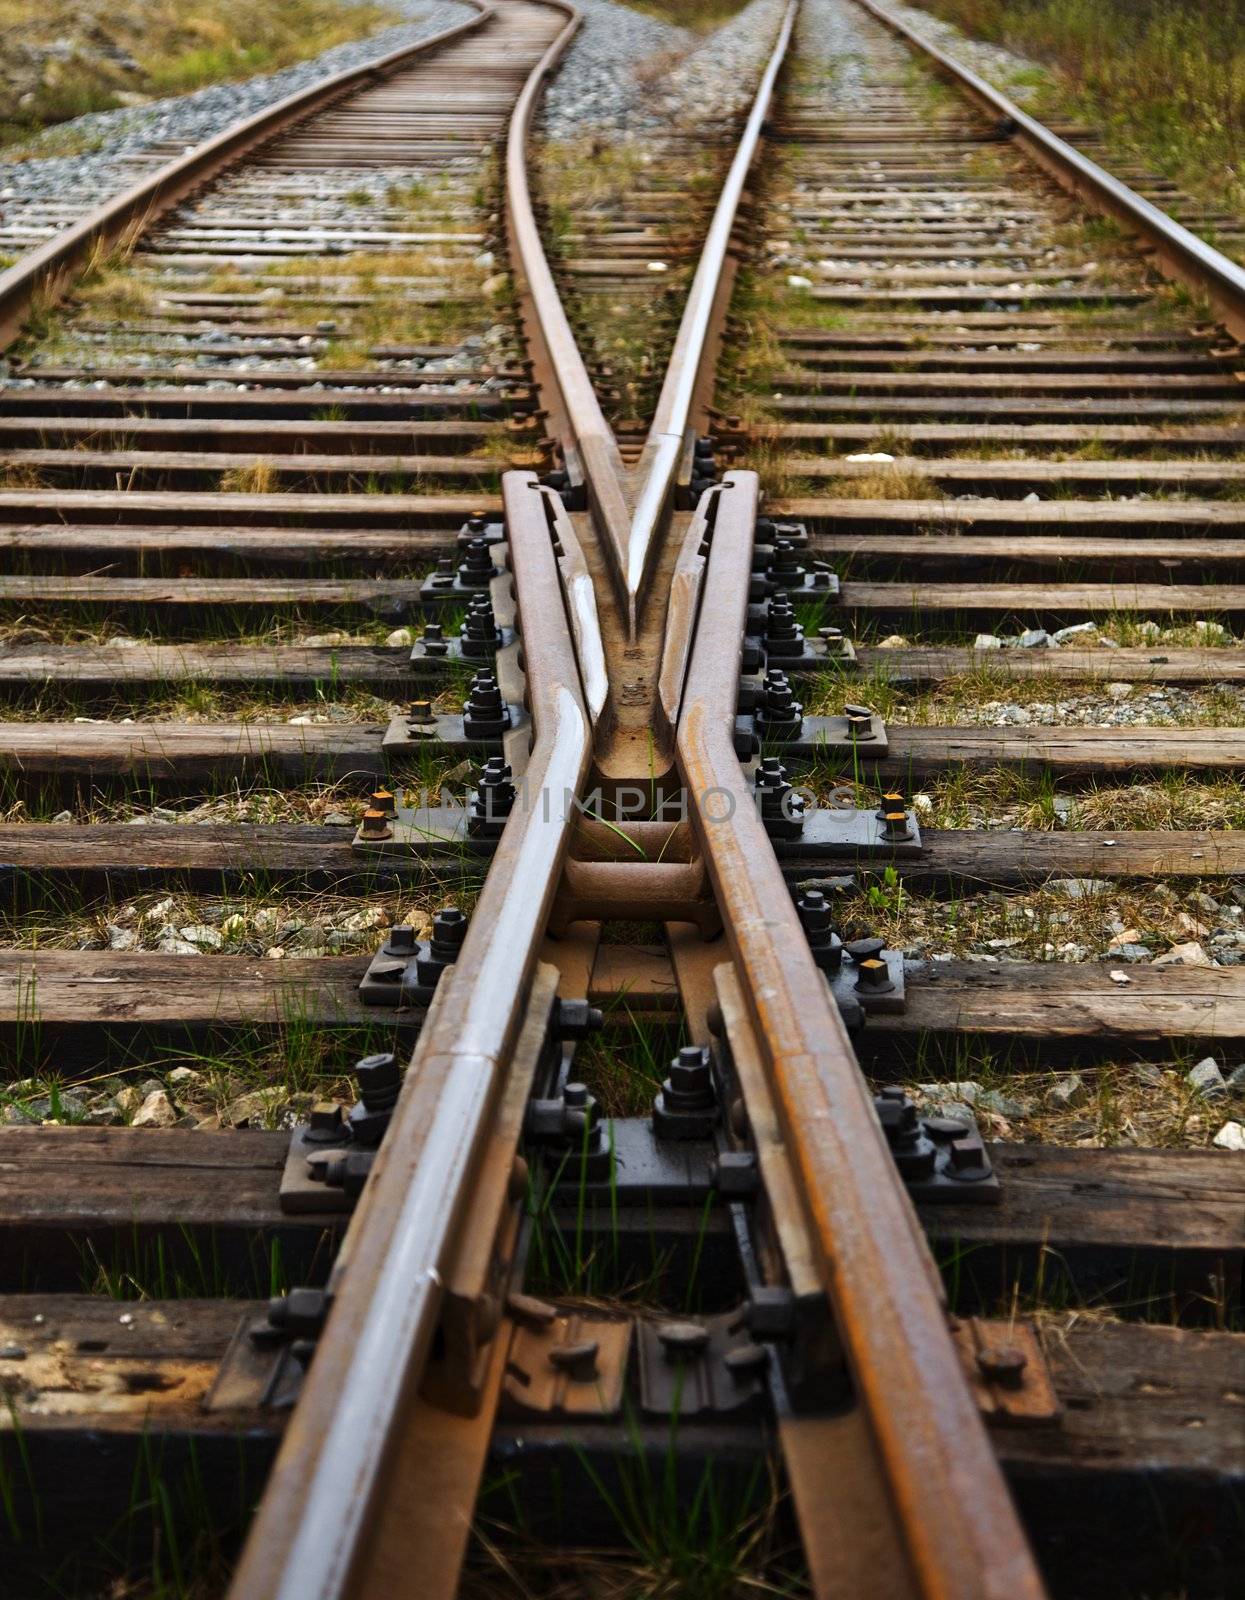 Two railway ways forming a fork